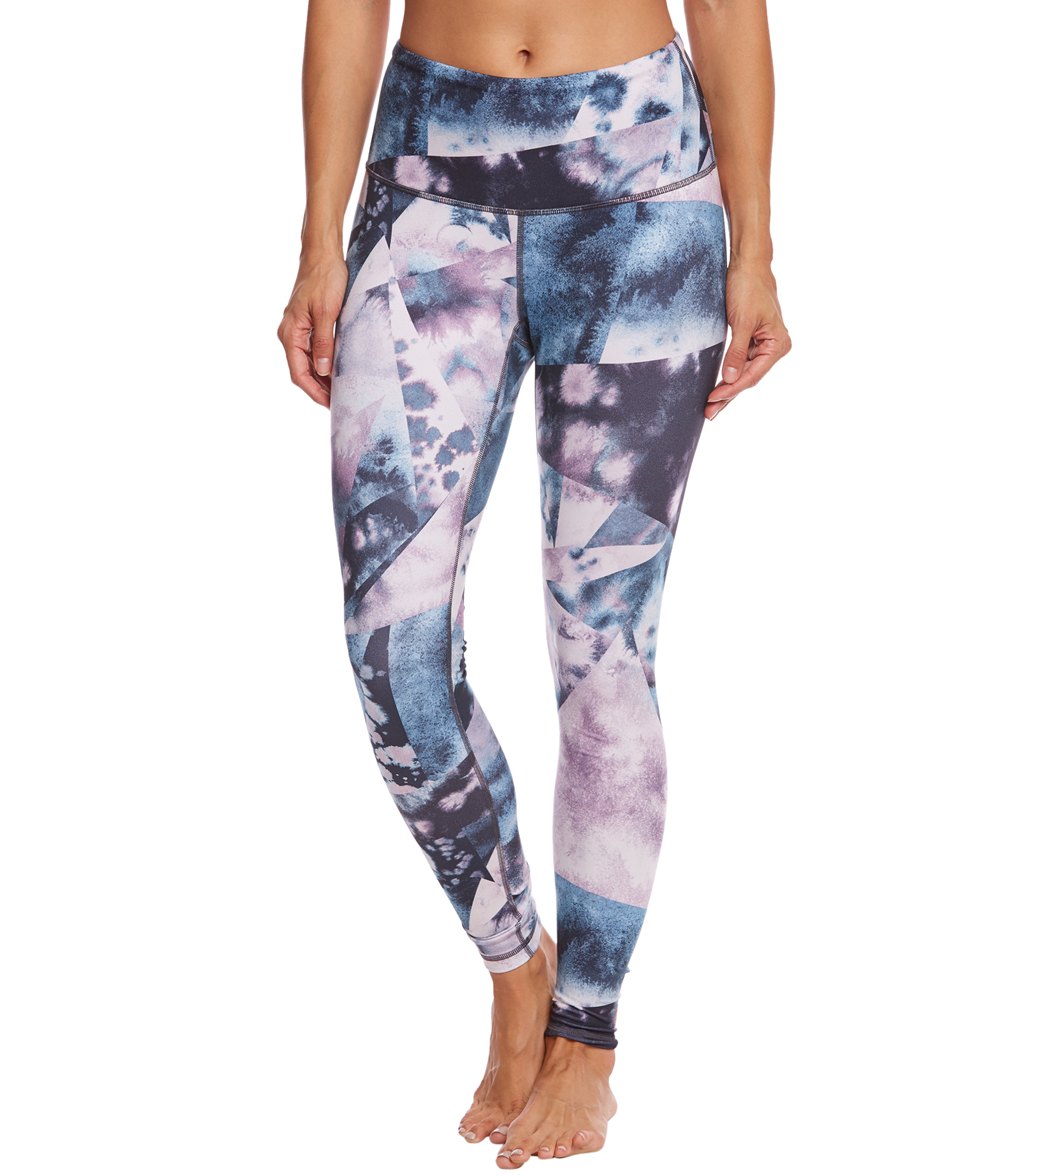 Lucy Women's Printed Studio High Rise Hatha Leggings - Pink Kiss Watercolor Print X-Small Nylon/Polyester/Spandex - Swimoutlet.com